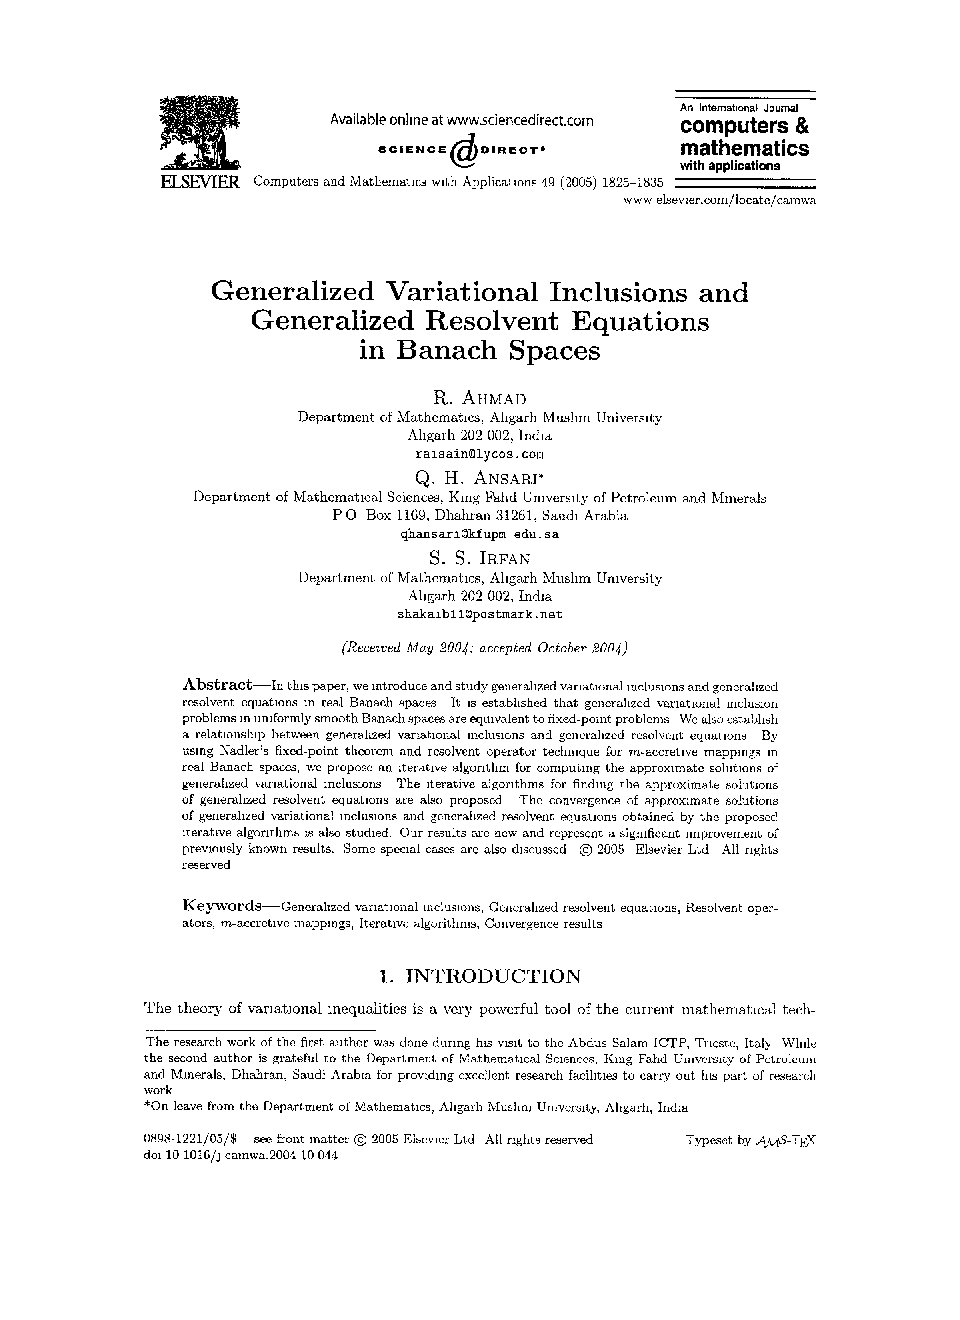 Generalized variational inclusions and generalized resolvent equations in banach spaces